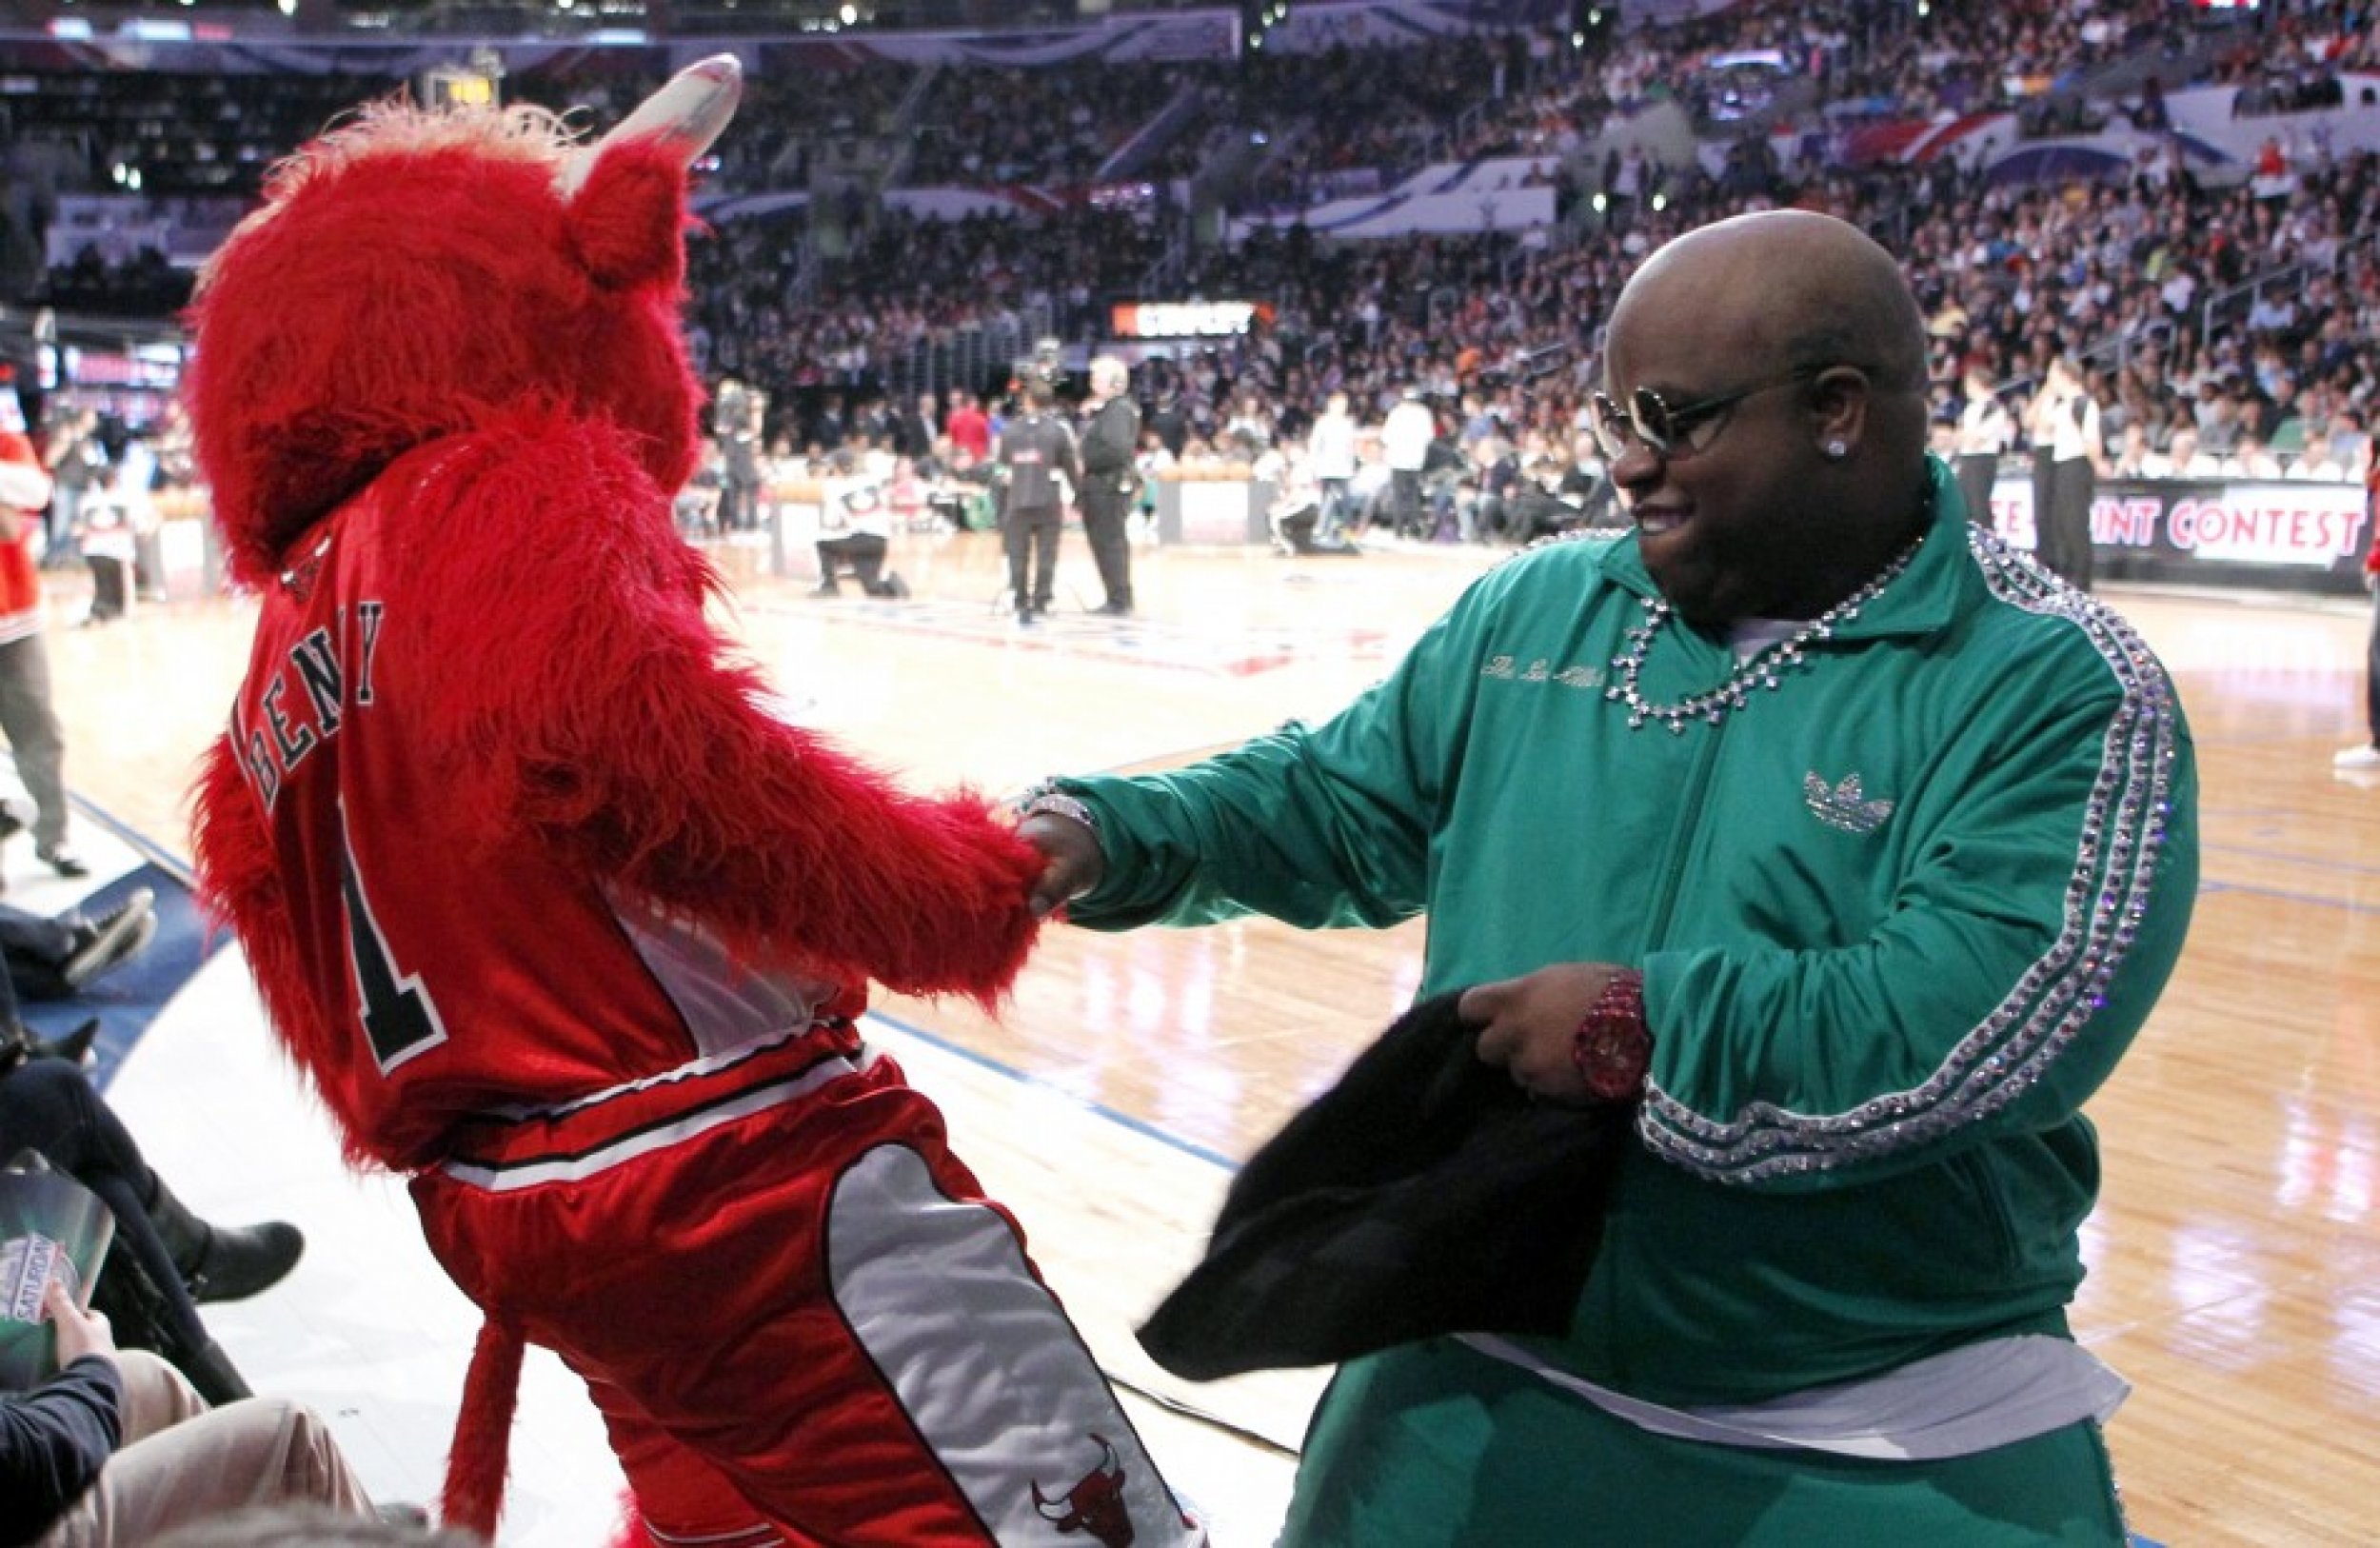 Cee Lo and Benny the Bull